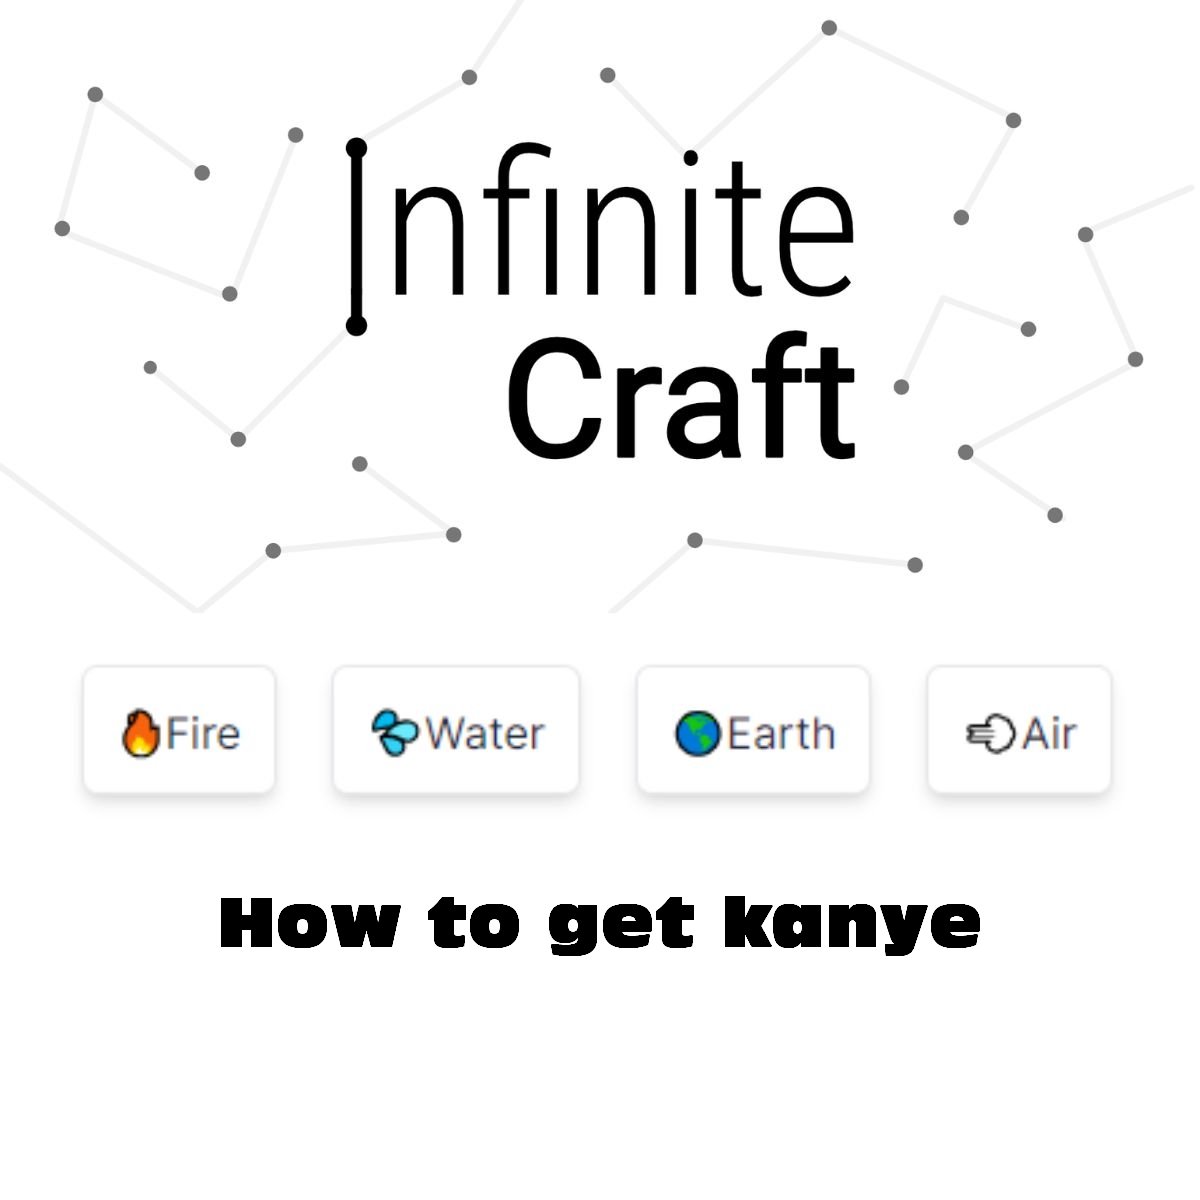 how to get kanye in infinite craft